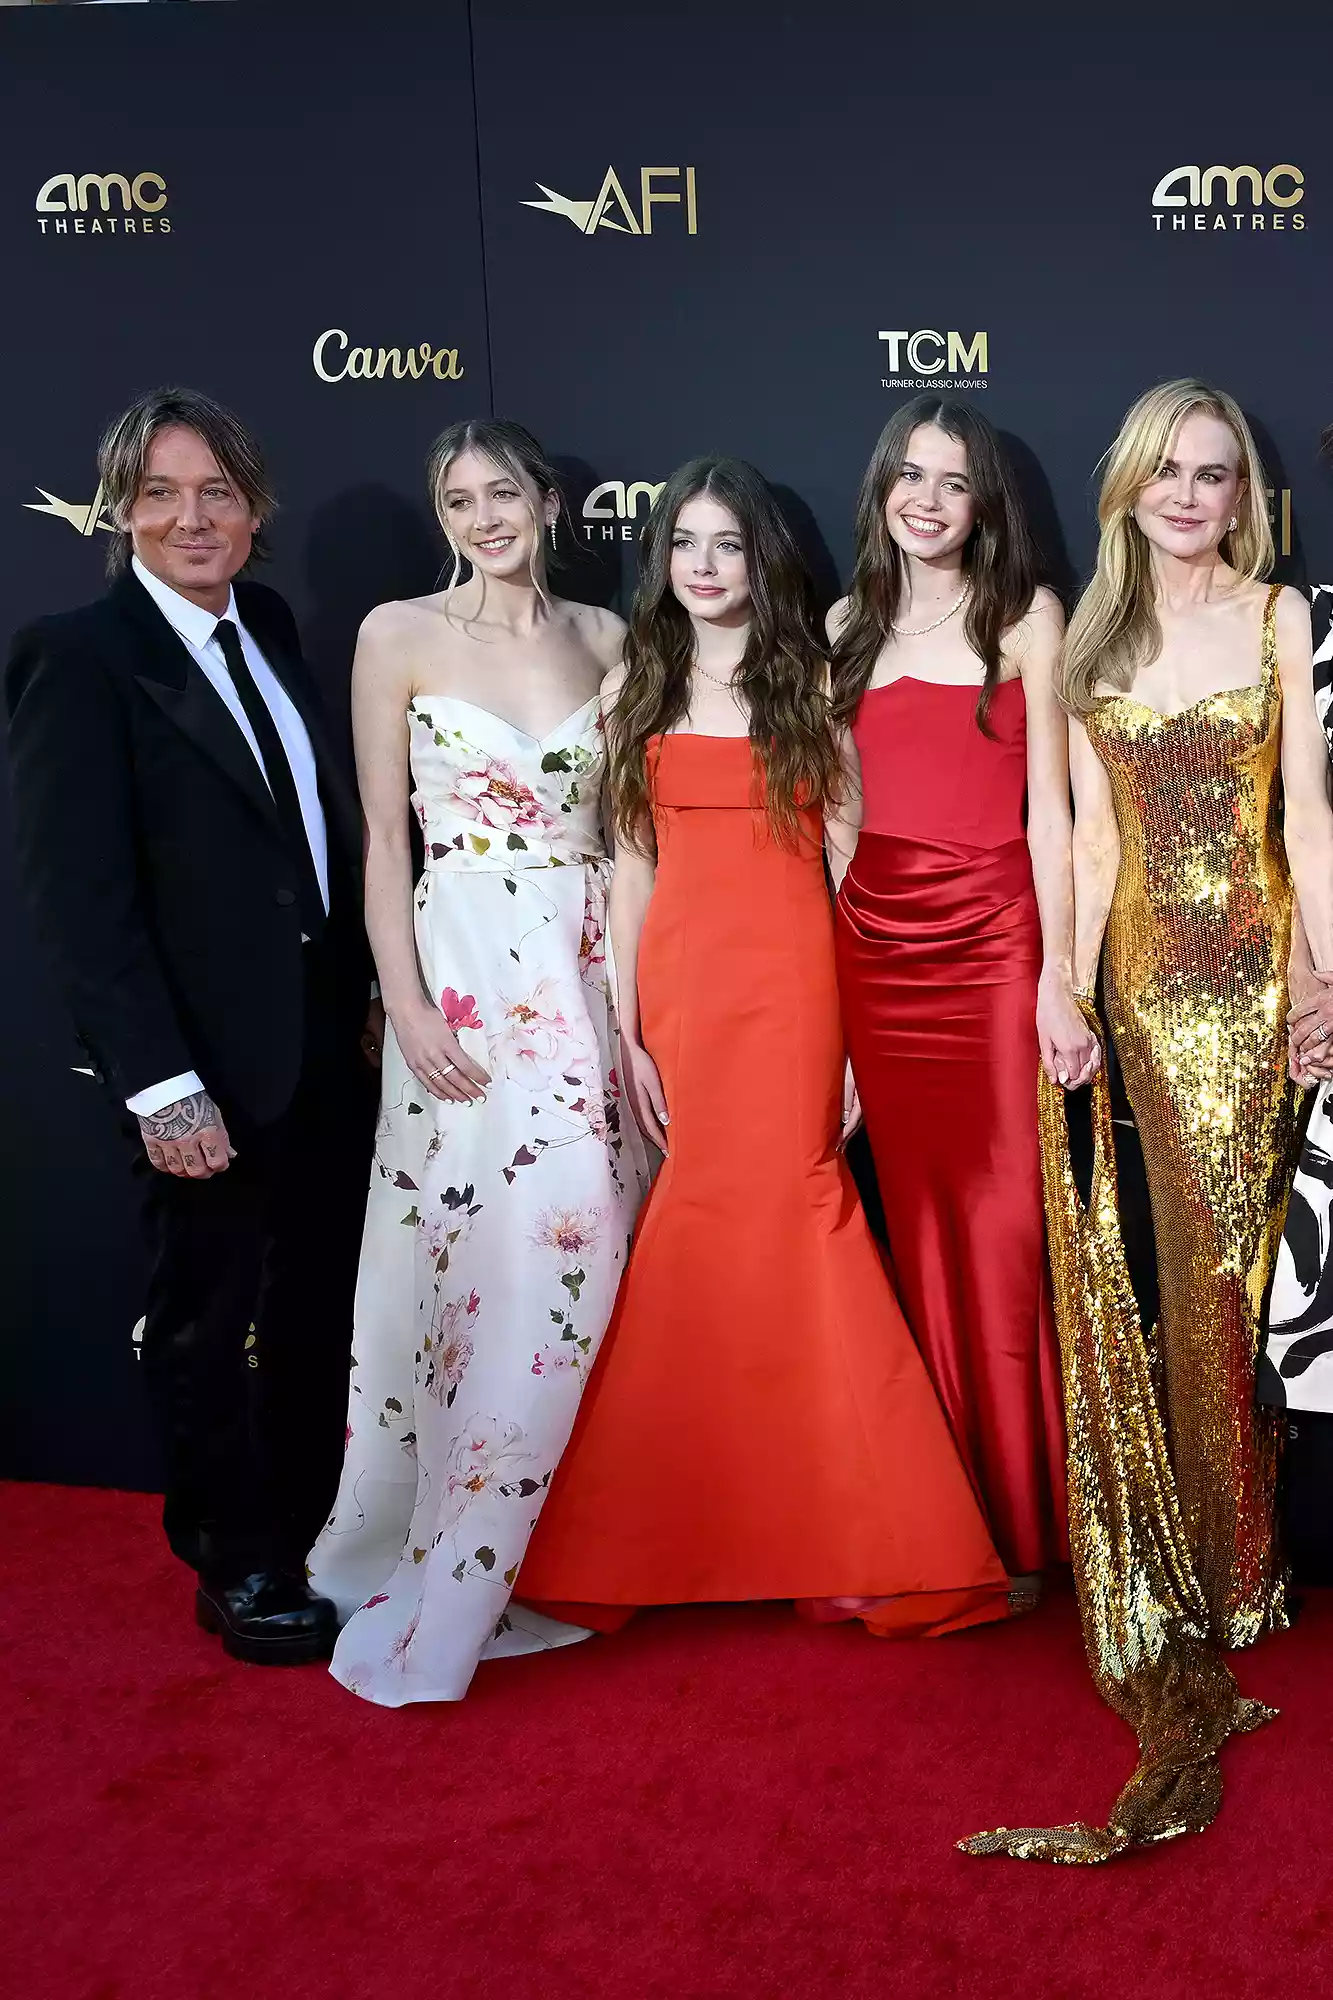 Nicole Kidman and Keith Urban stand alongside their teenage daughters Sunday and Faith for a memorable photo at her AFI tribute